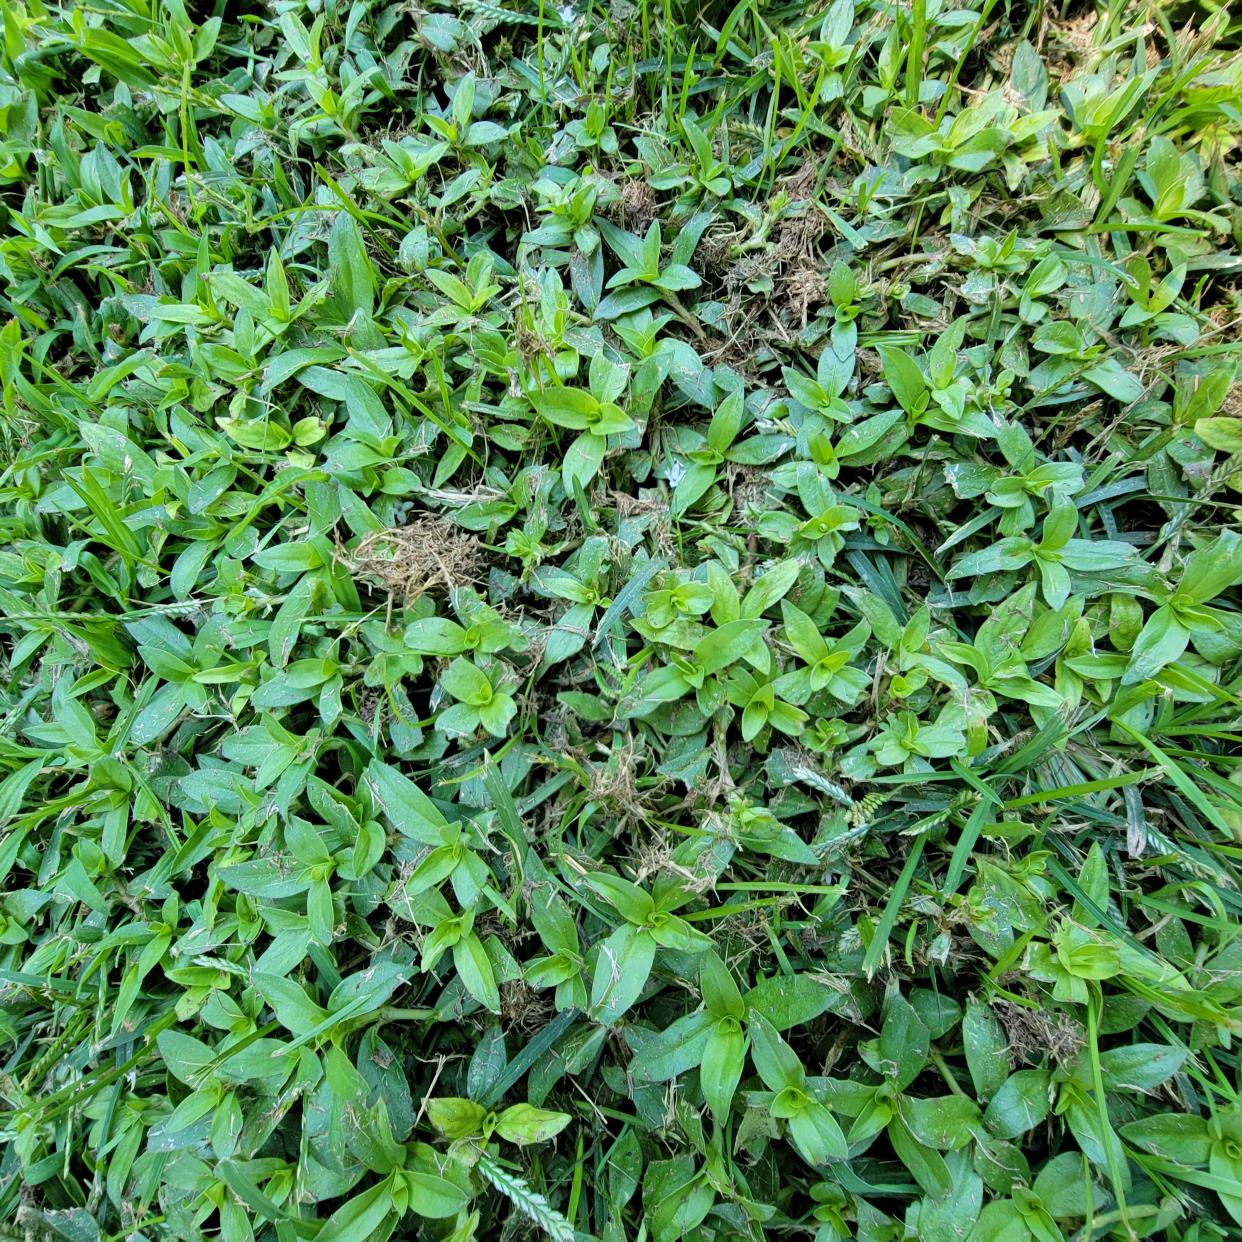 Virginia buttonweed can take over your lawn, especially in prolonged wet conditions or in areas that don't drain well.